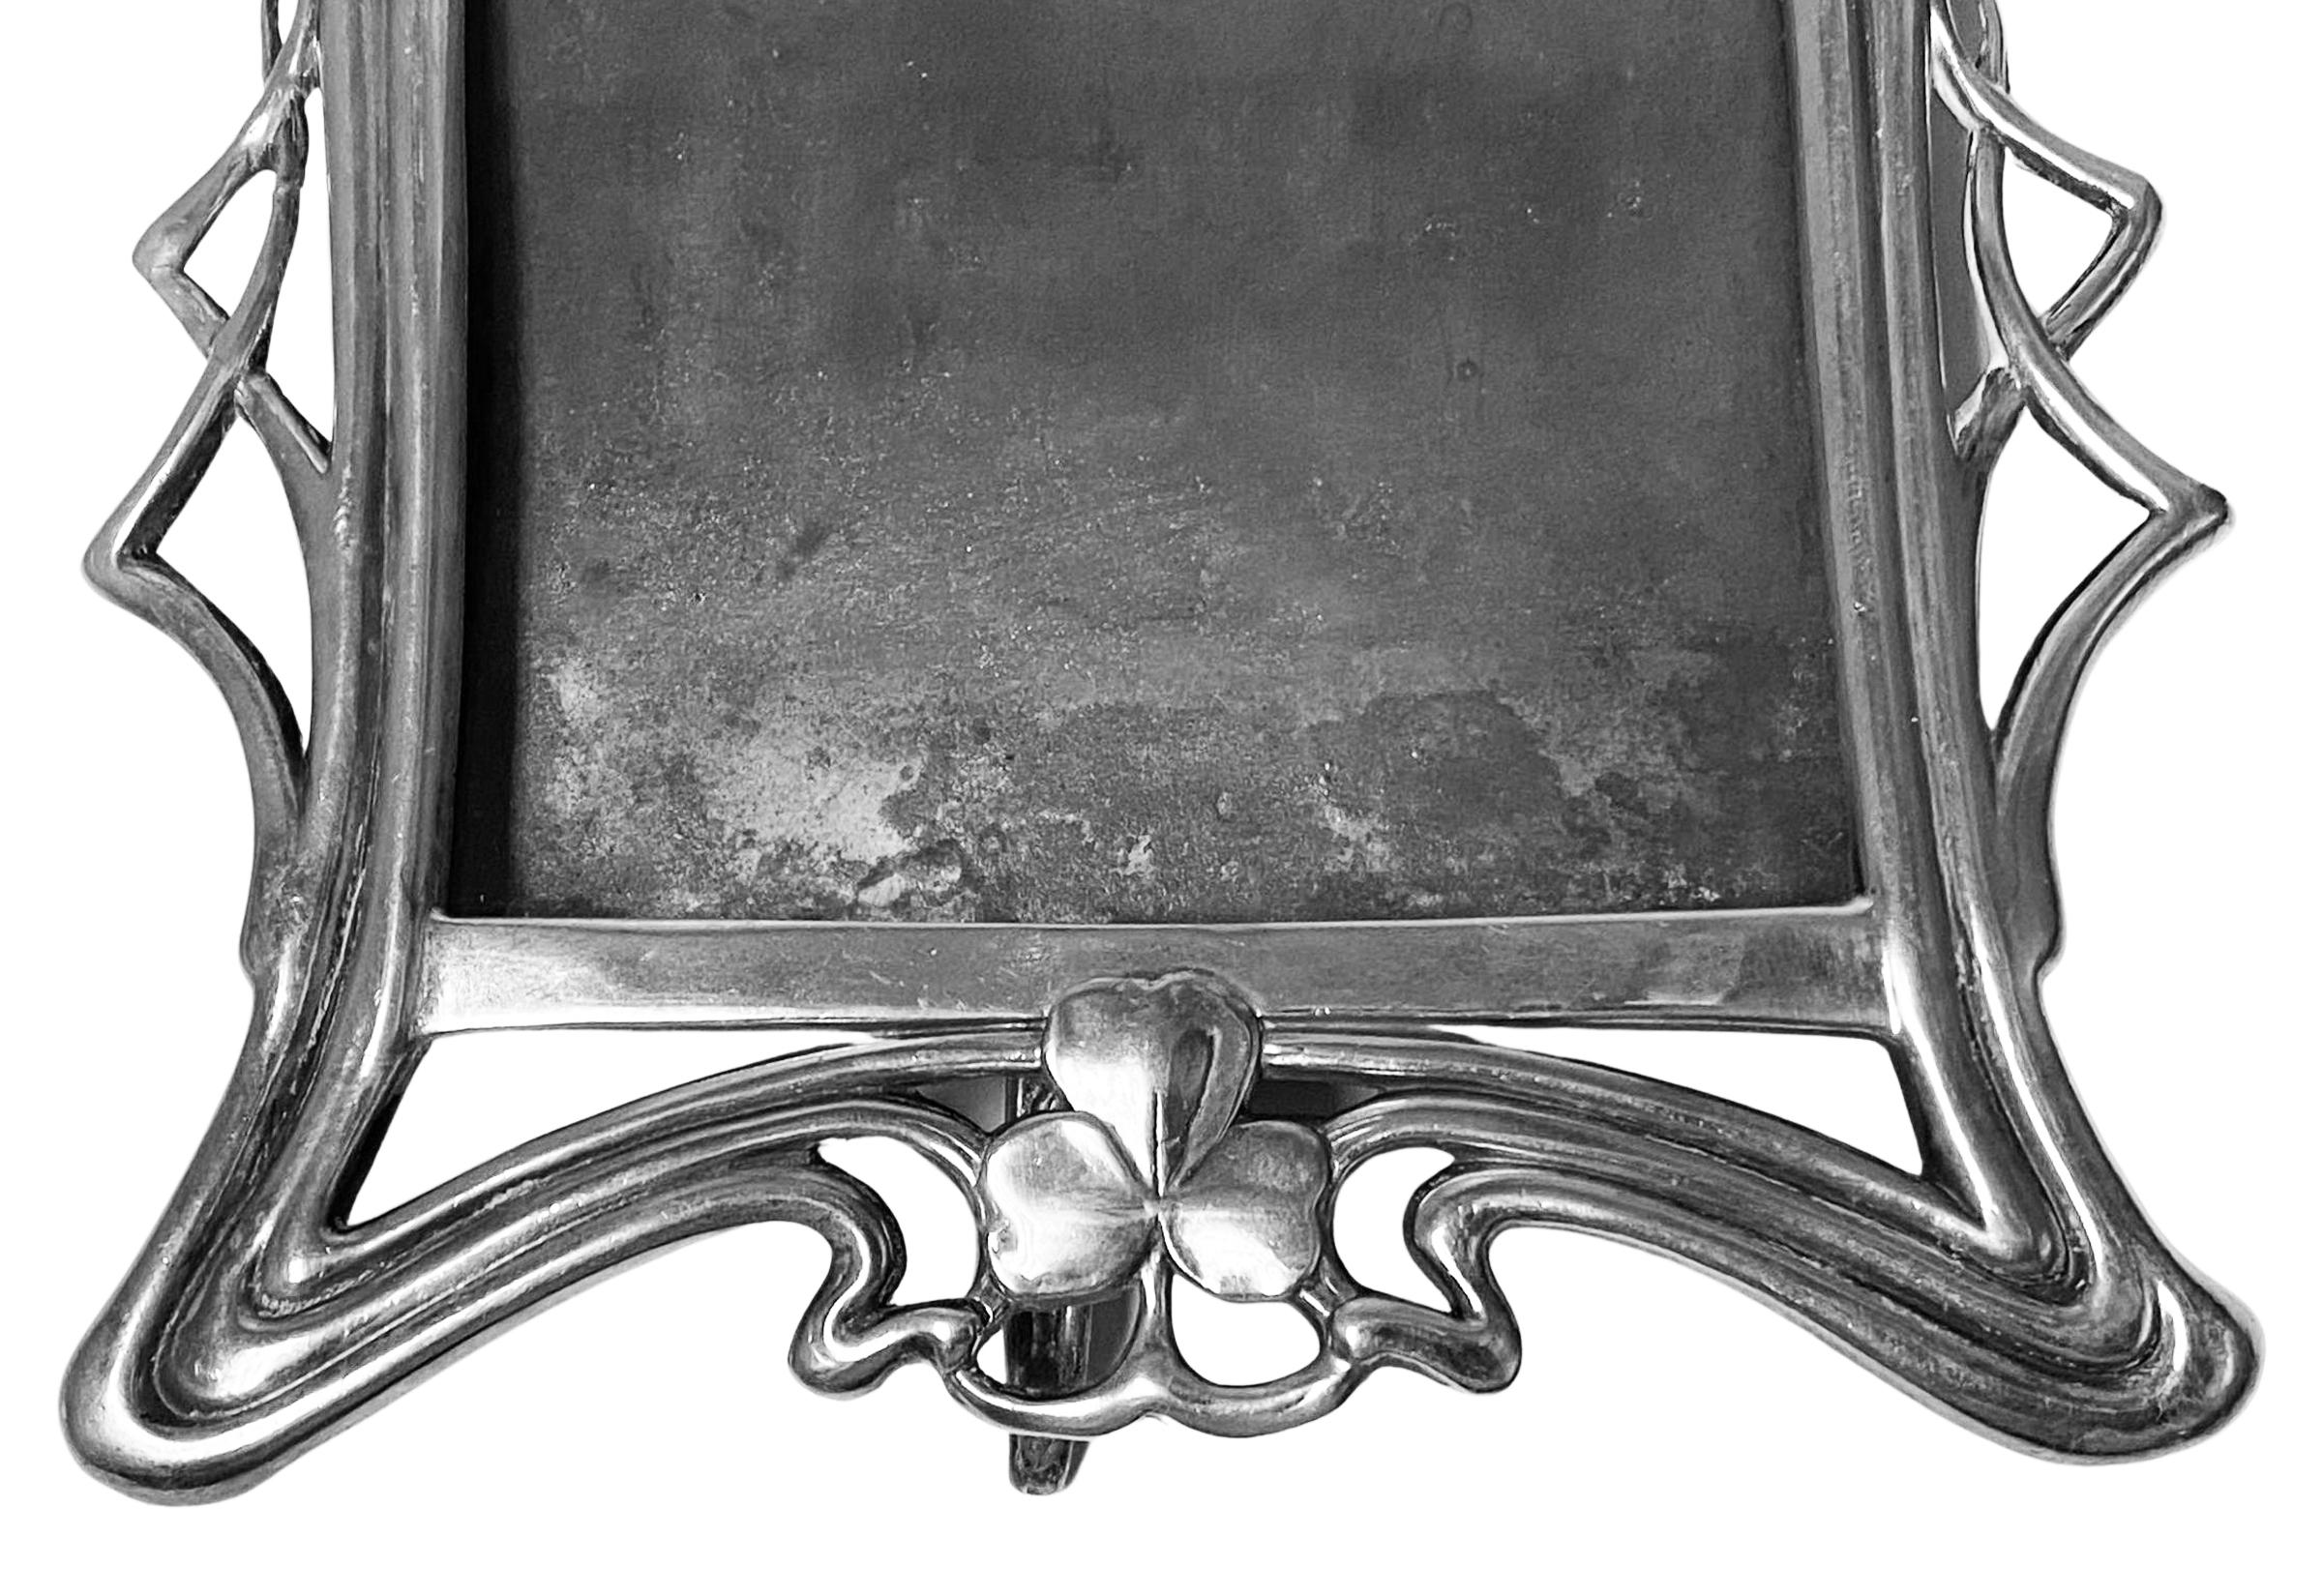 WMF Art Nouveau Jugendstil Britannia metal Photograph Frame, Germany C.1900, WMF In Good Condition For Sale In Toronto, Ontario